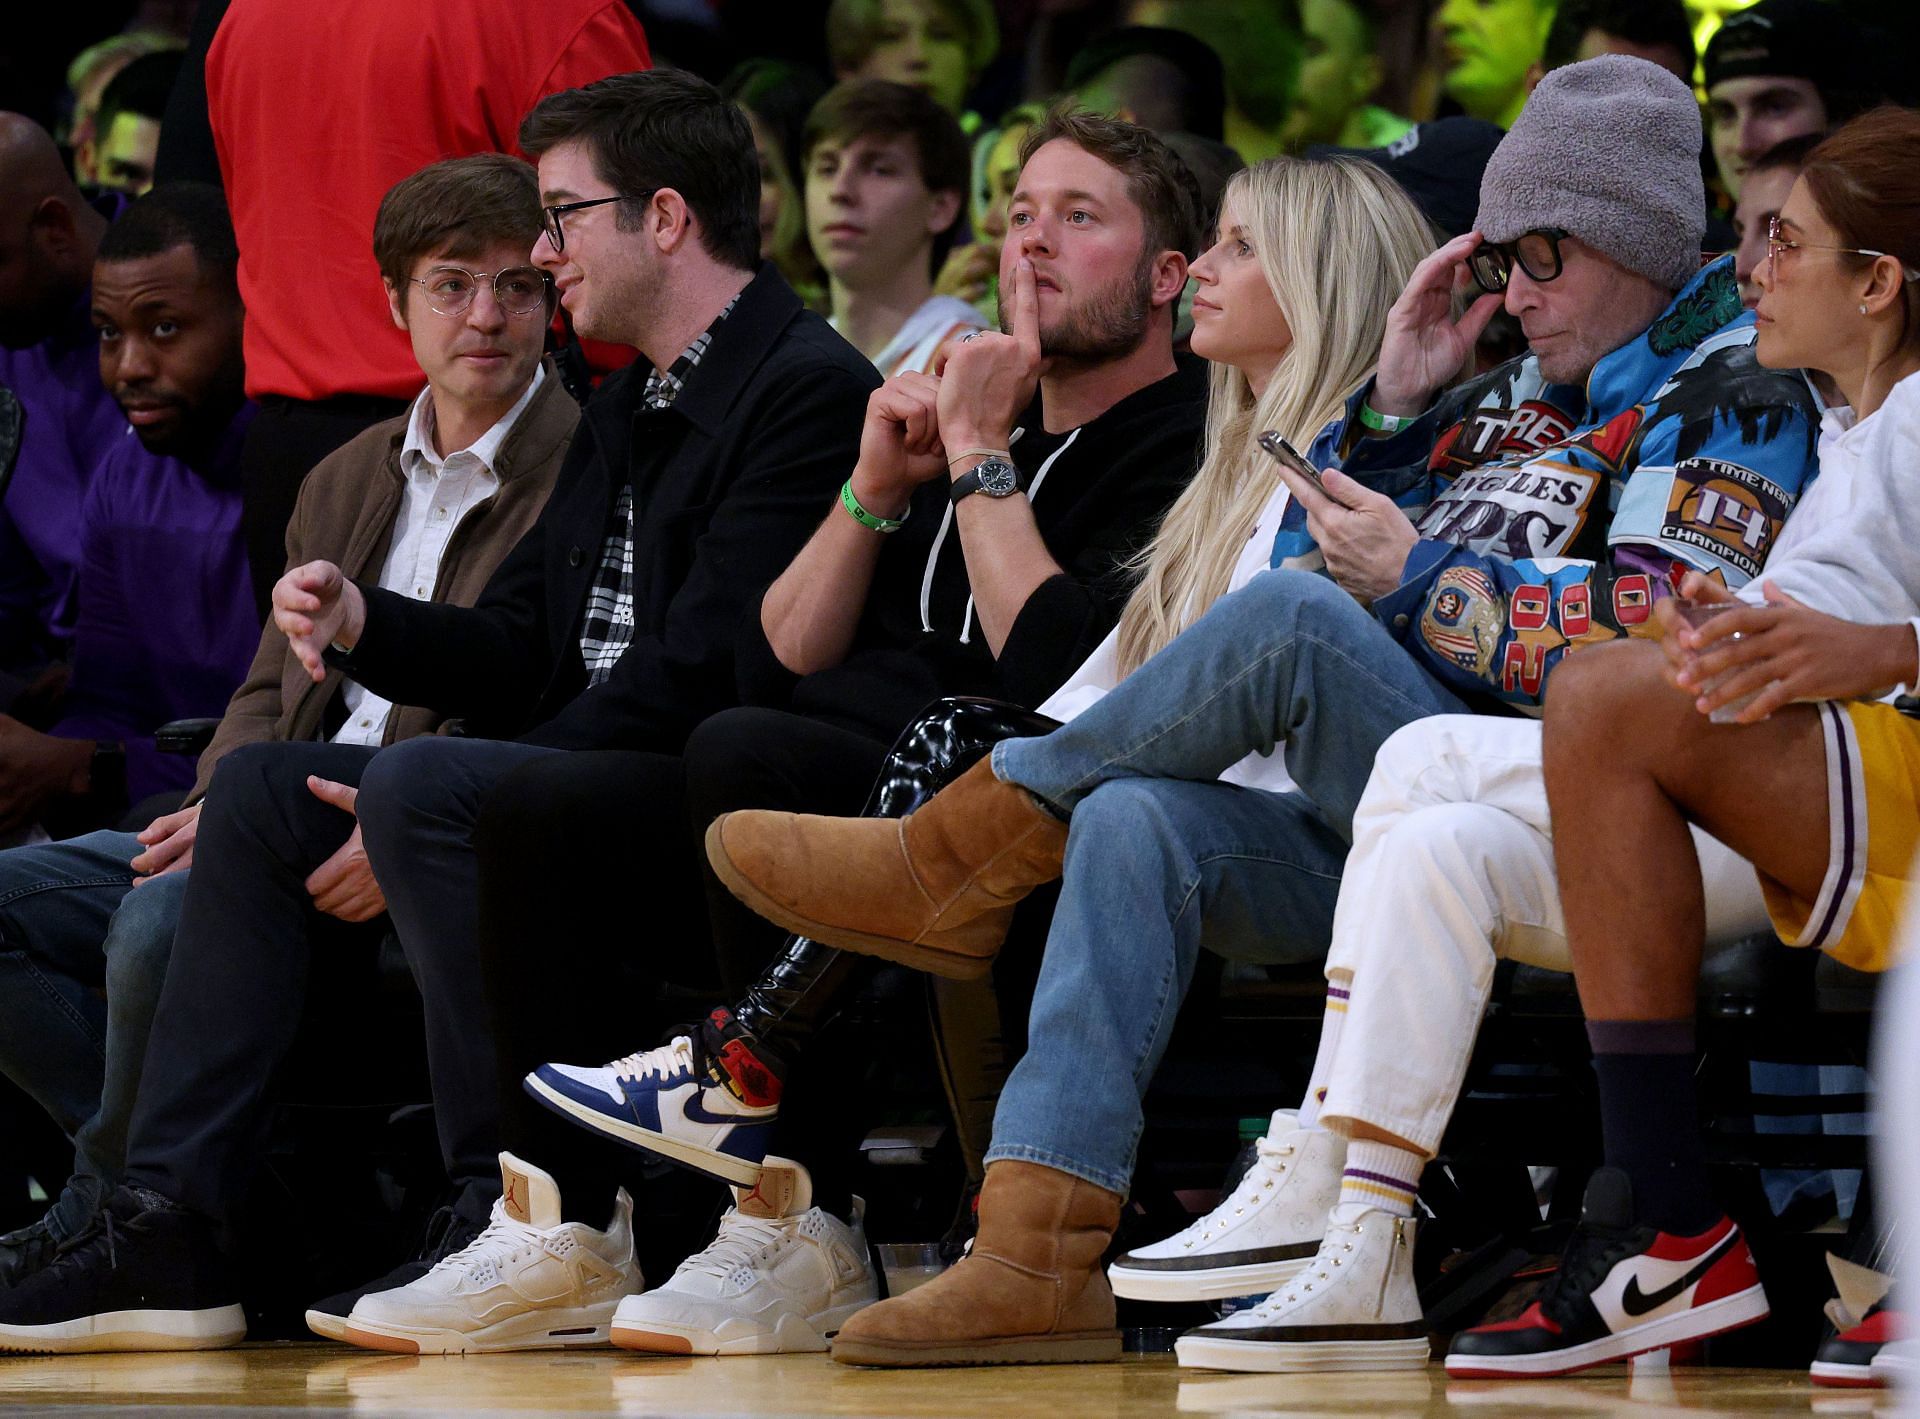 Kelly and Matthew Stafford on courtside for an NBA game